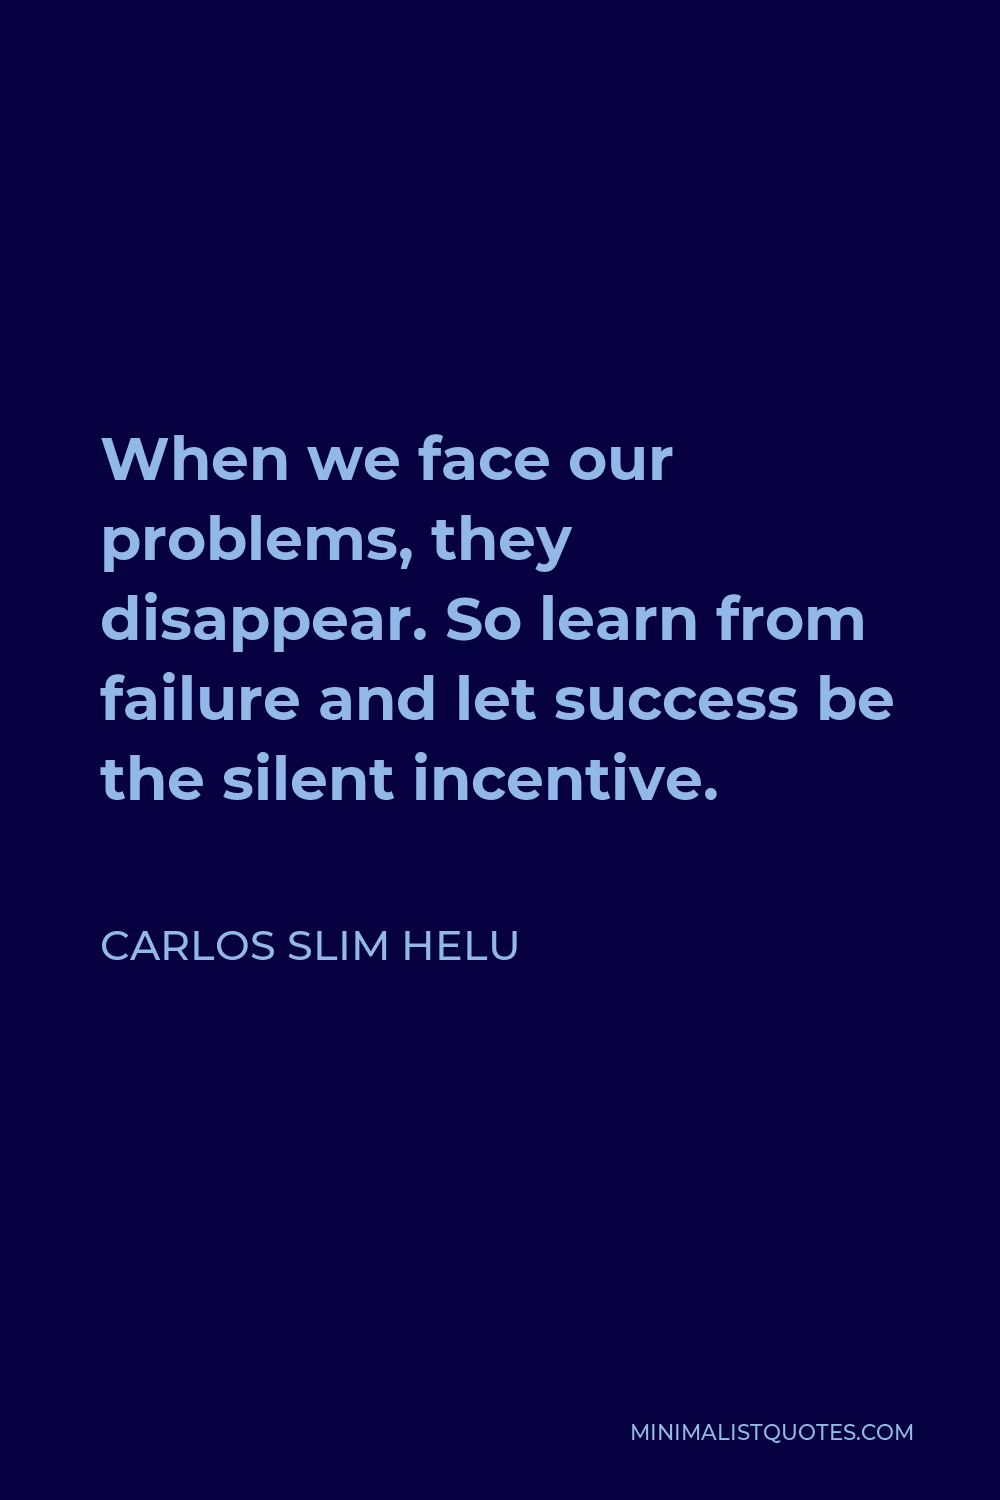 Carlos Slim Helu Quote: When we face our problems, they disappear